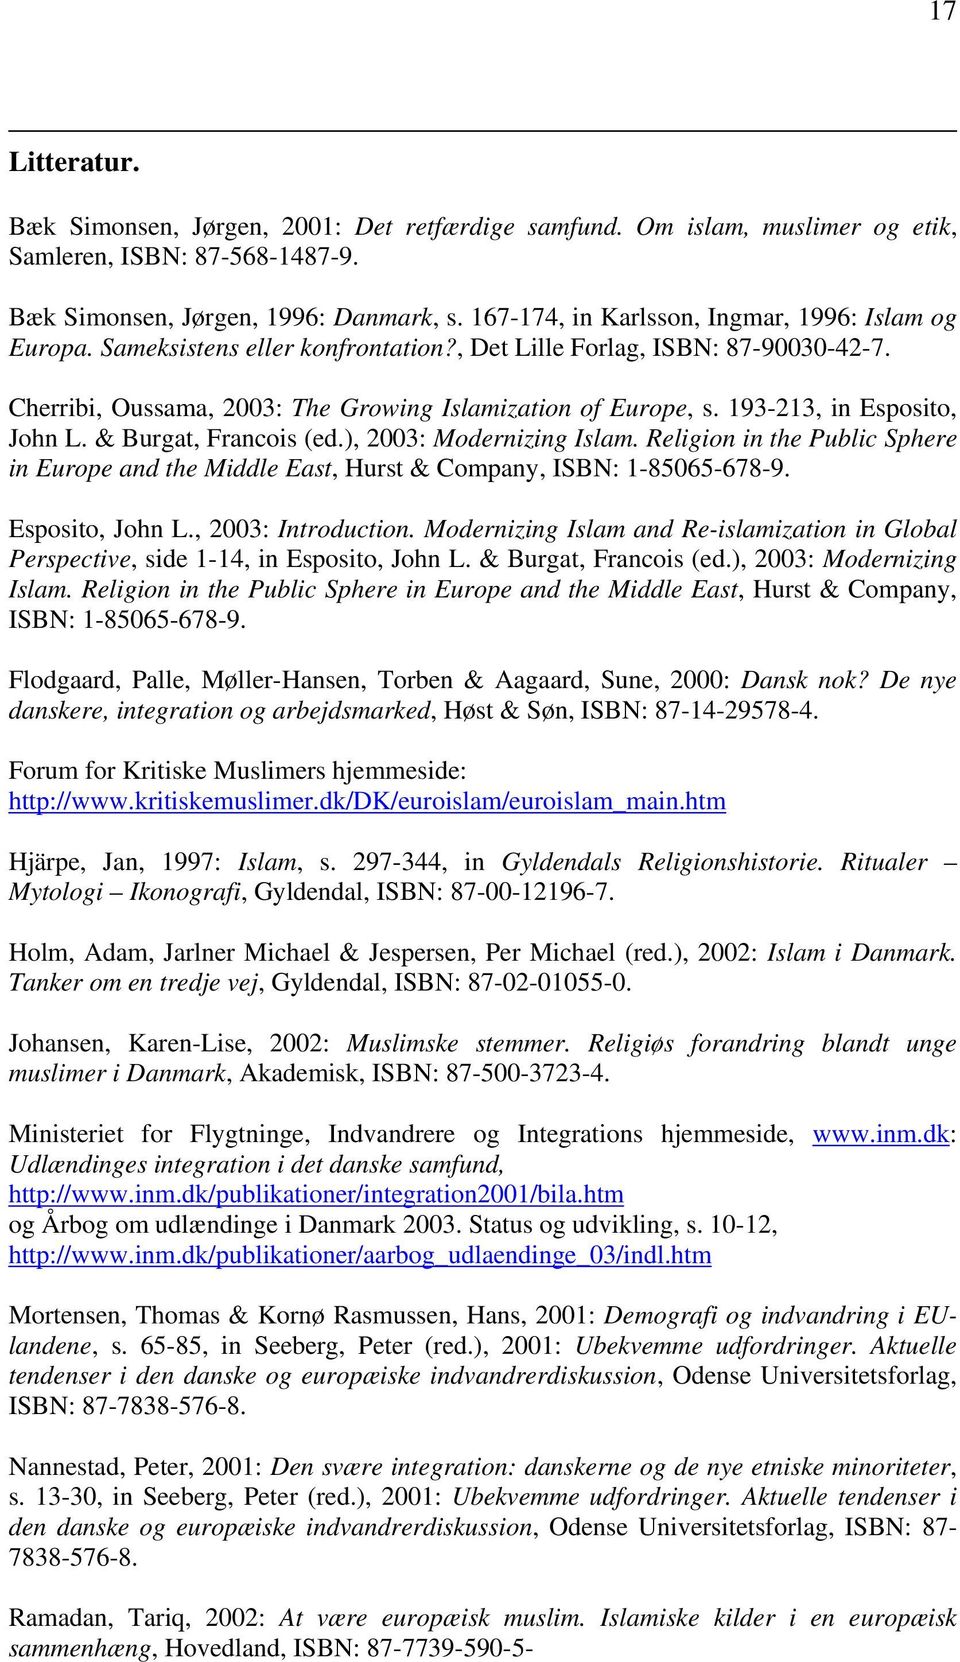 193-213, in Esposito, John L. & Burgat, Francois (ed.), 2003: Modernizing Islam. Religion in the Public Sphere in Europe and the Middle East, Hurst & Company, ISBN: 1-85065-678-9. Esposito, John L., 2003: Introduction.